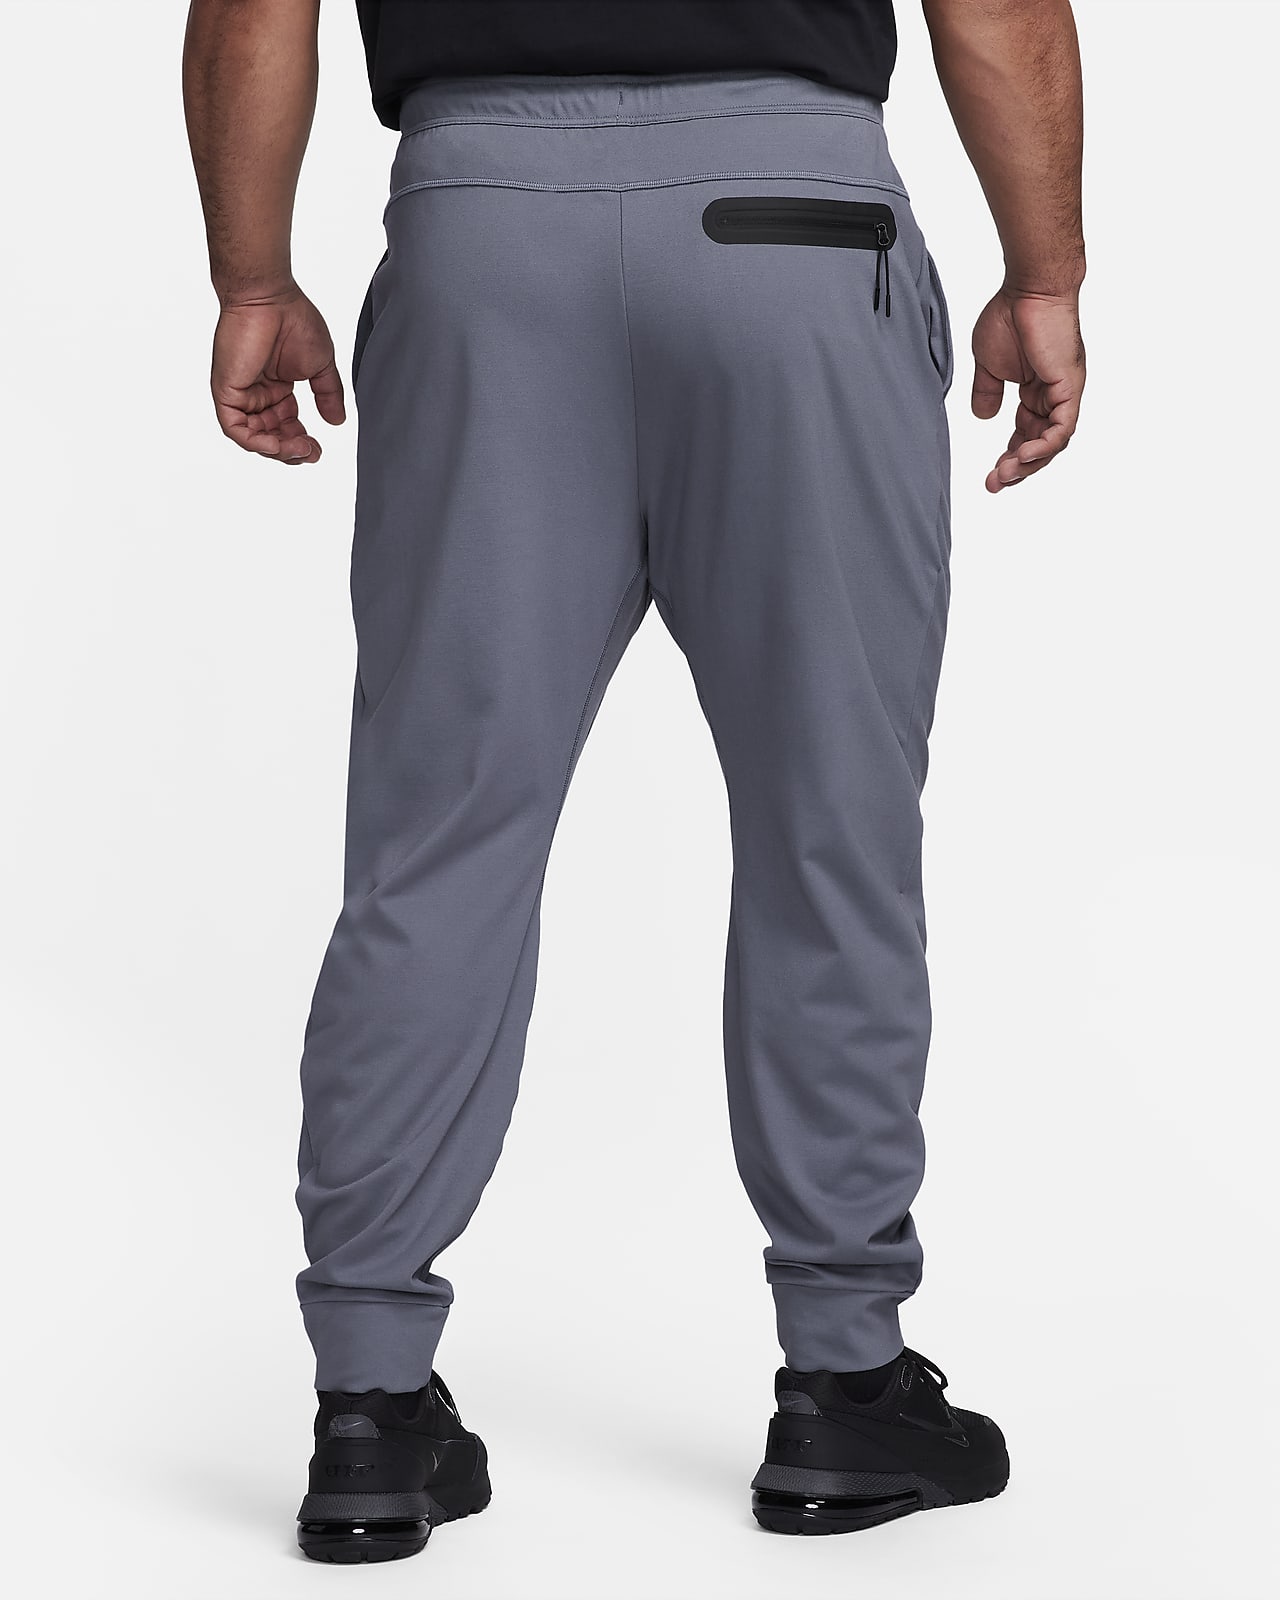 https://static.nike.com/a/images/t_PDP_1280_v1/f_auto,q_auto:eco/a0a8d4fa-9007-4a6e-aae5-59b8d6cc3ba2/sportswear-tech-mens-knit-lightweight-joggers-rncPZS.png